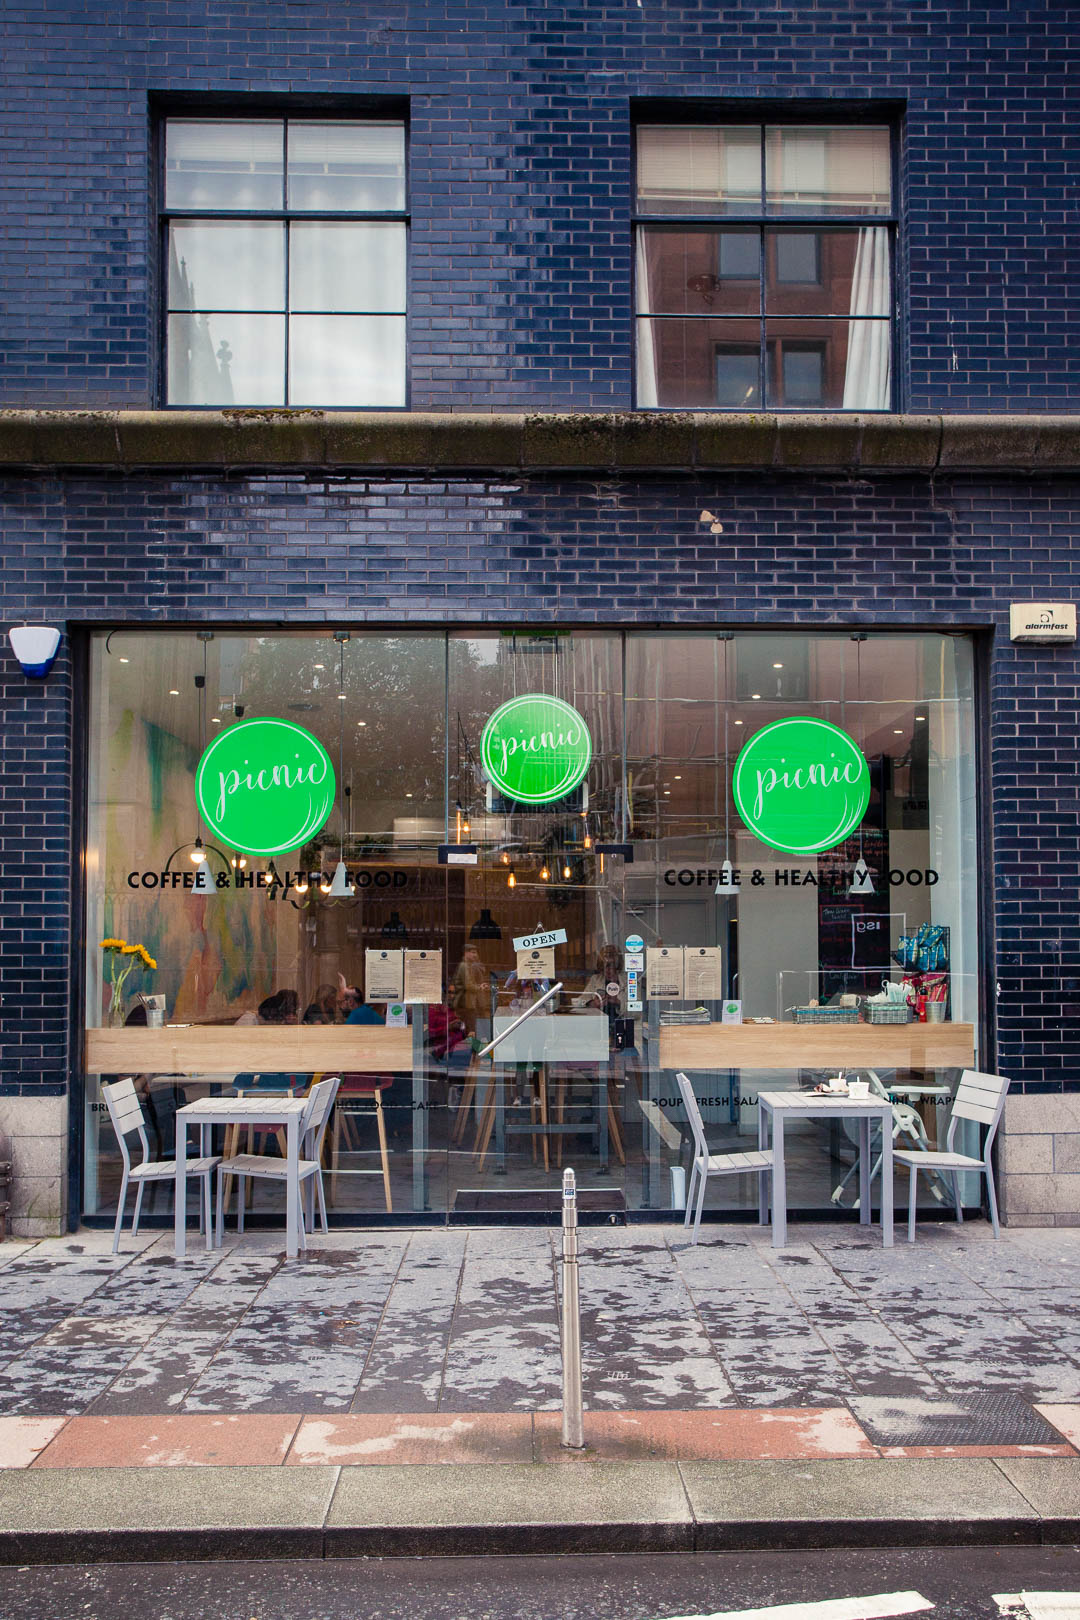 Picnic Glasgow is the vegan cafe that the Merchant City area of the city centre needed! Run by Michelle Morrow it fills the area with healthy and ethical breakfast and lunch options and closes a gap in the fast-food oriented vegan restaurant scene of the city centre!